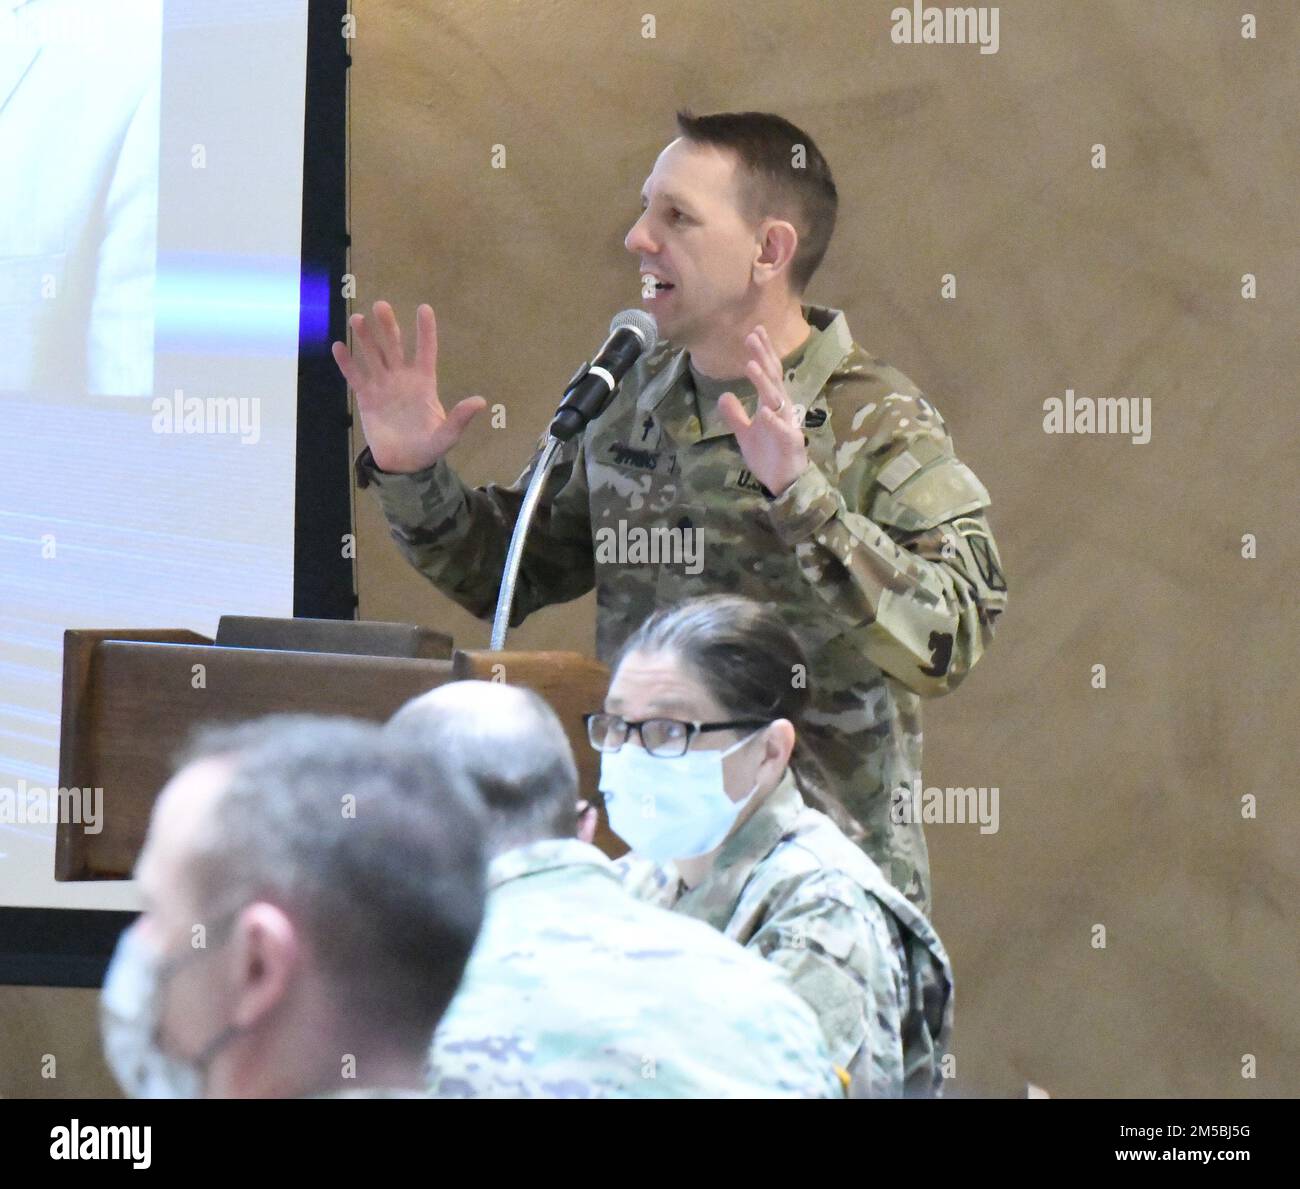 Chaplain (Lt. Col.) Matthew Atkins, 10th Mountain Division (LI) chaplain, thanked everyone for attending the spiritual readiness breakfast at the Commons on Feb. 23, and shared some thoughts on suicide prevention. (Photo by Mike Strasser, Fort Drum Garrison Public Affairs) Stock Photo